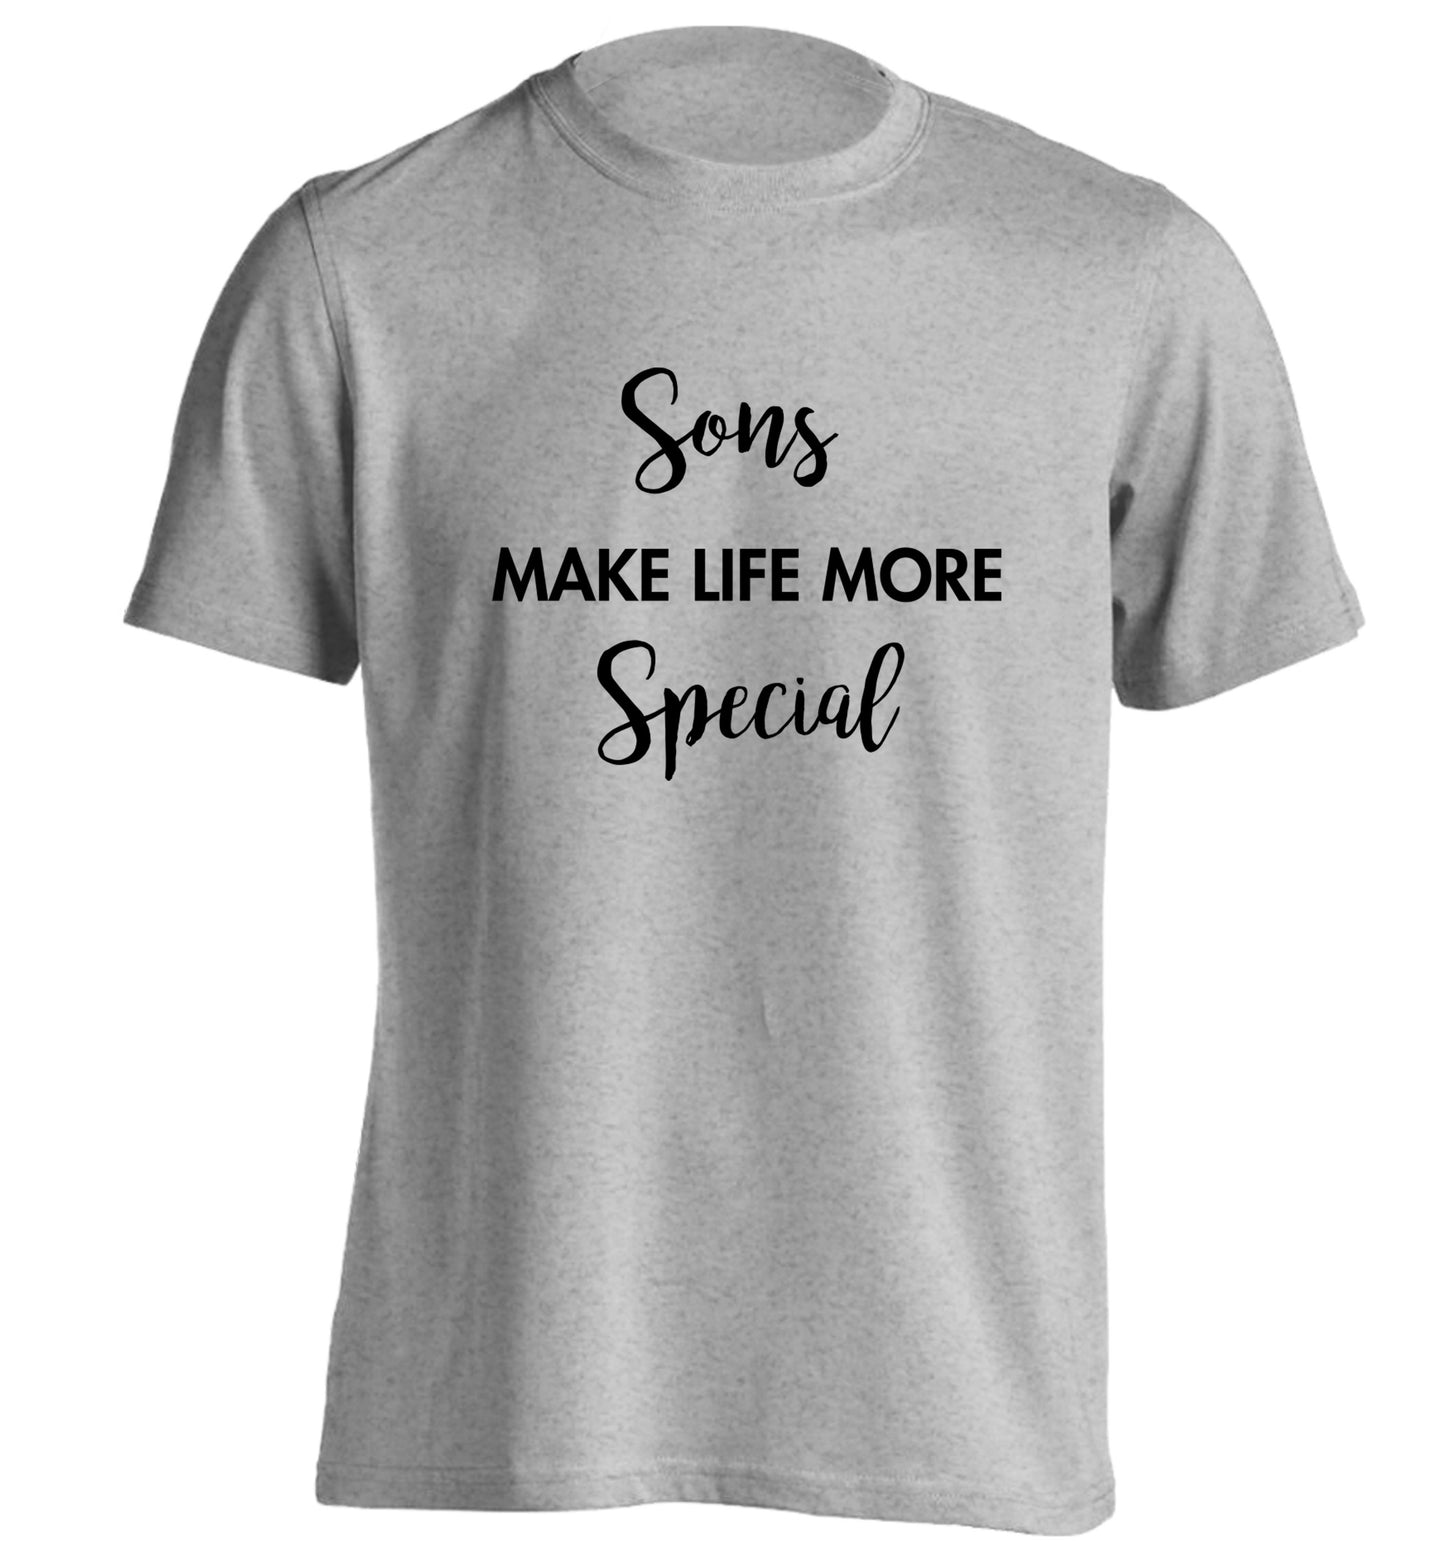 Sons make life more special adults unisex grey Tshirt 2XL